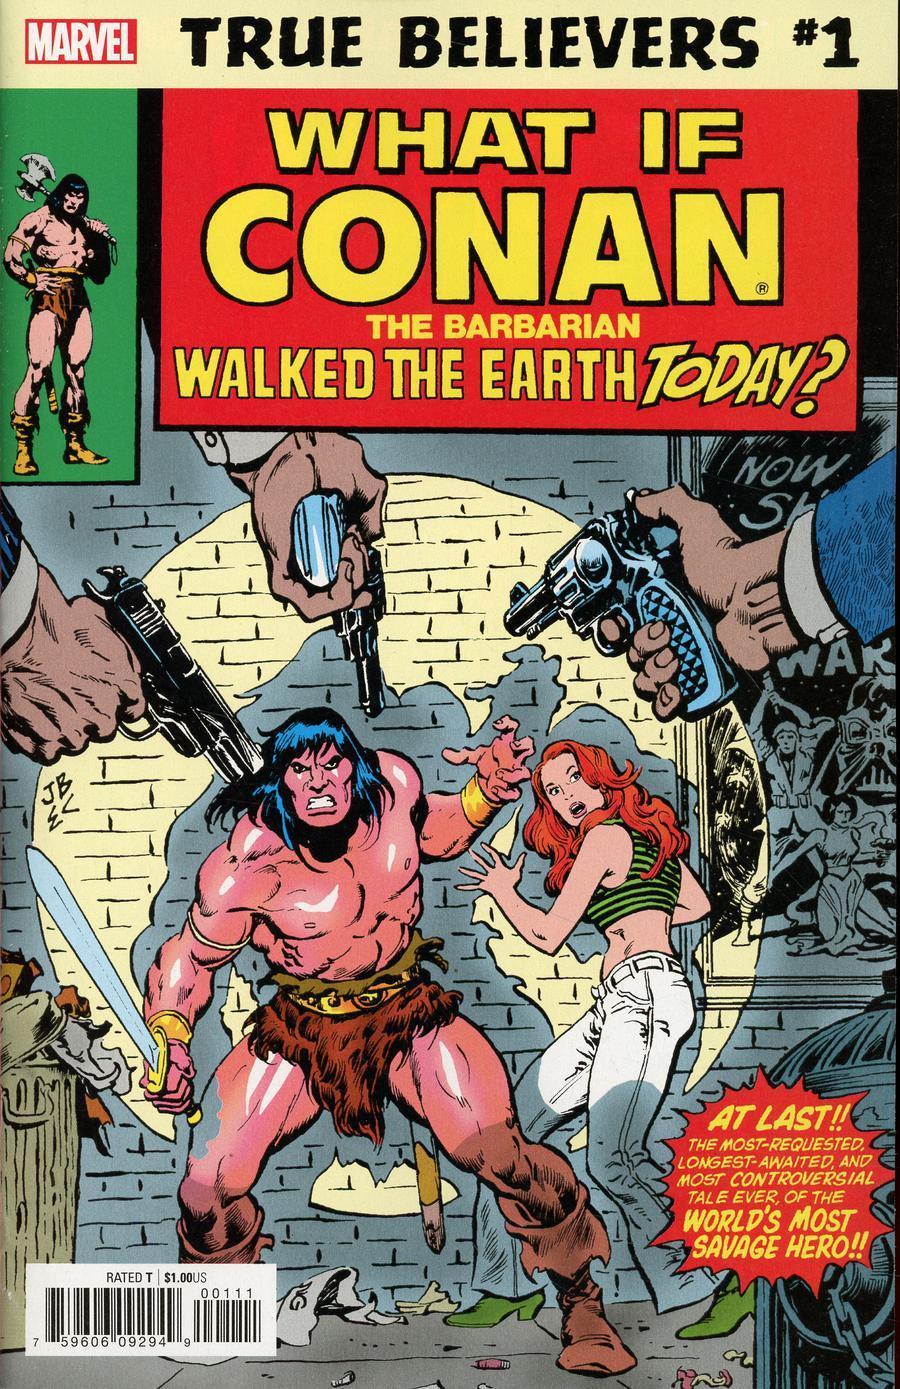 True Believers What If Conan The Barbarian Walked The Earth Today Vol. 1 #1